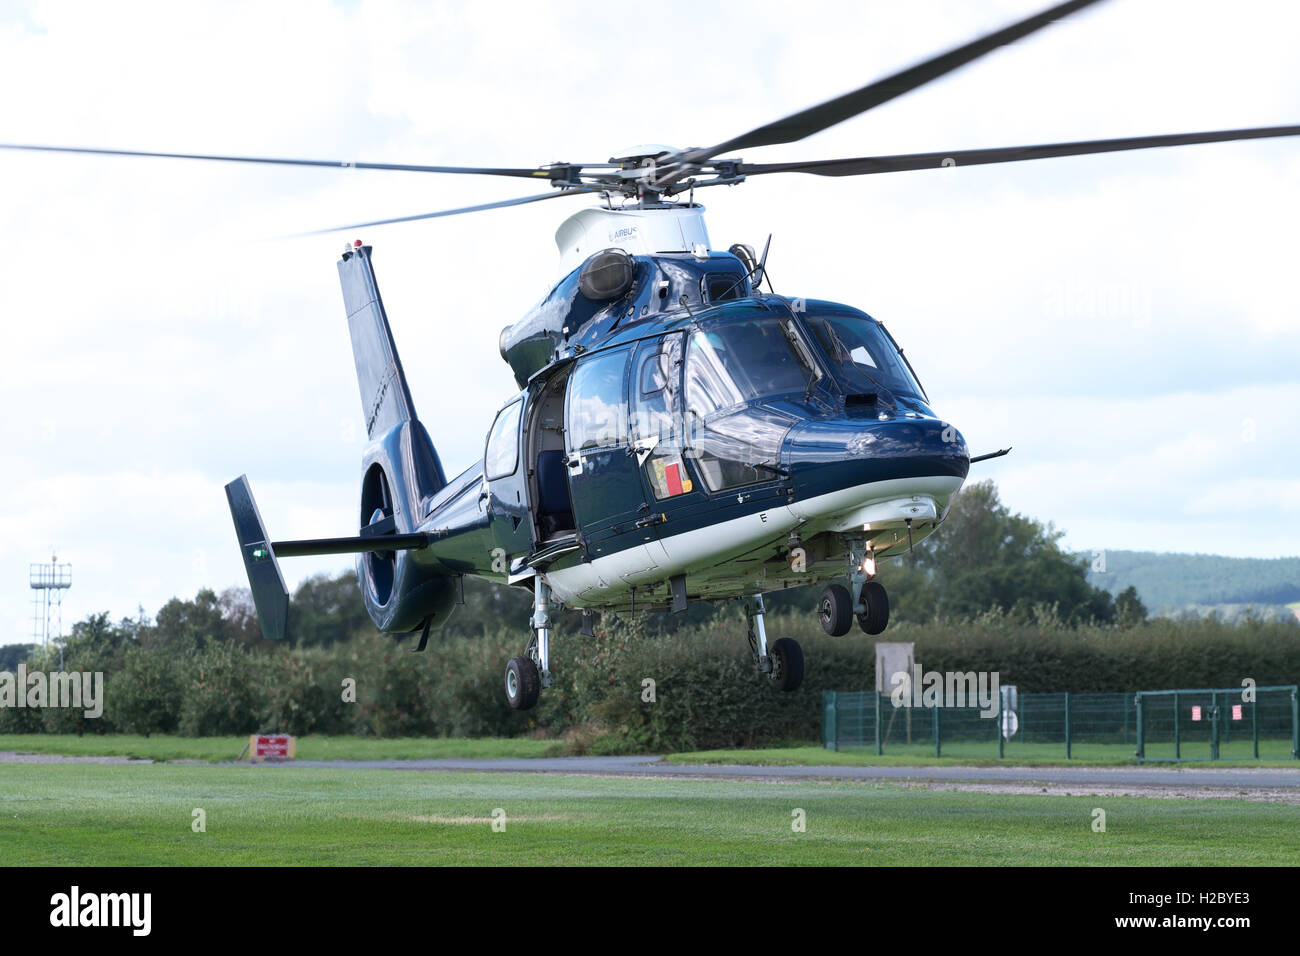 SAS 22 SAS Dauphin helicopter based at Credenhill, Hereford, Herefordshire, UK Stock Photo